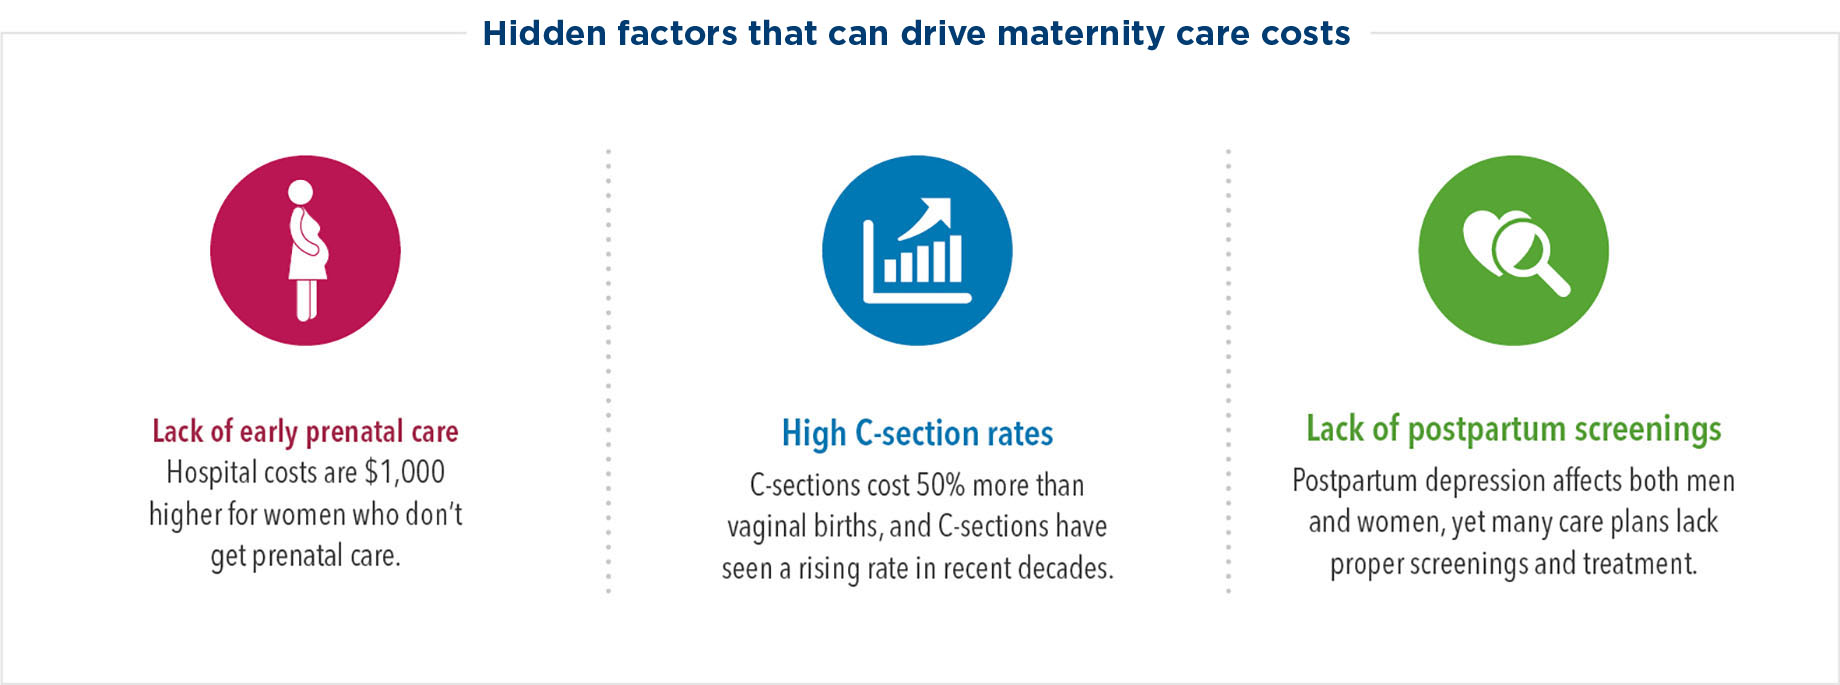 Hidden factors that can drive maternity care costs include lack of prenatal care, high C-section rates, and lack of postpartum screenings. Hospital costs are $1,000 higher for women who don’t get prenatal care. C-sections cost 50% more than vaginal births, and C-sections have seen a rising rate in recent decades. Postpartum depression affects both men and women, yet many care plans lack proper screenings and treatment.